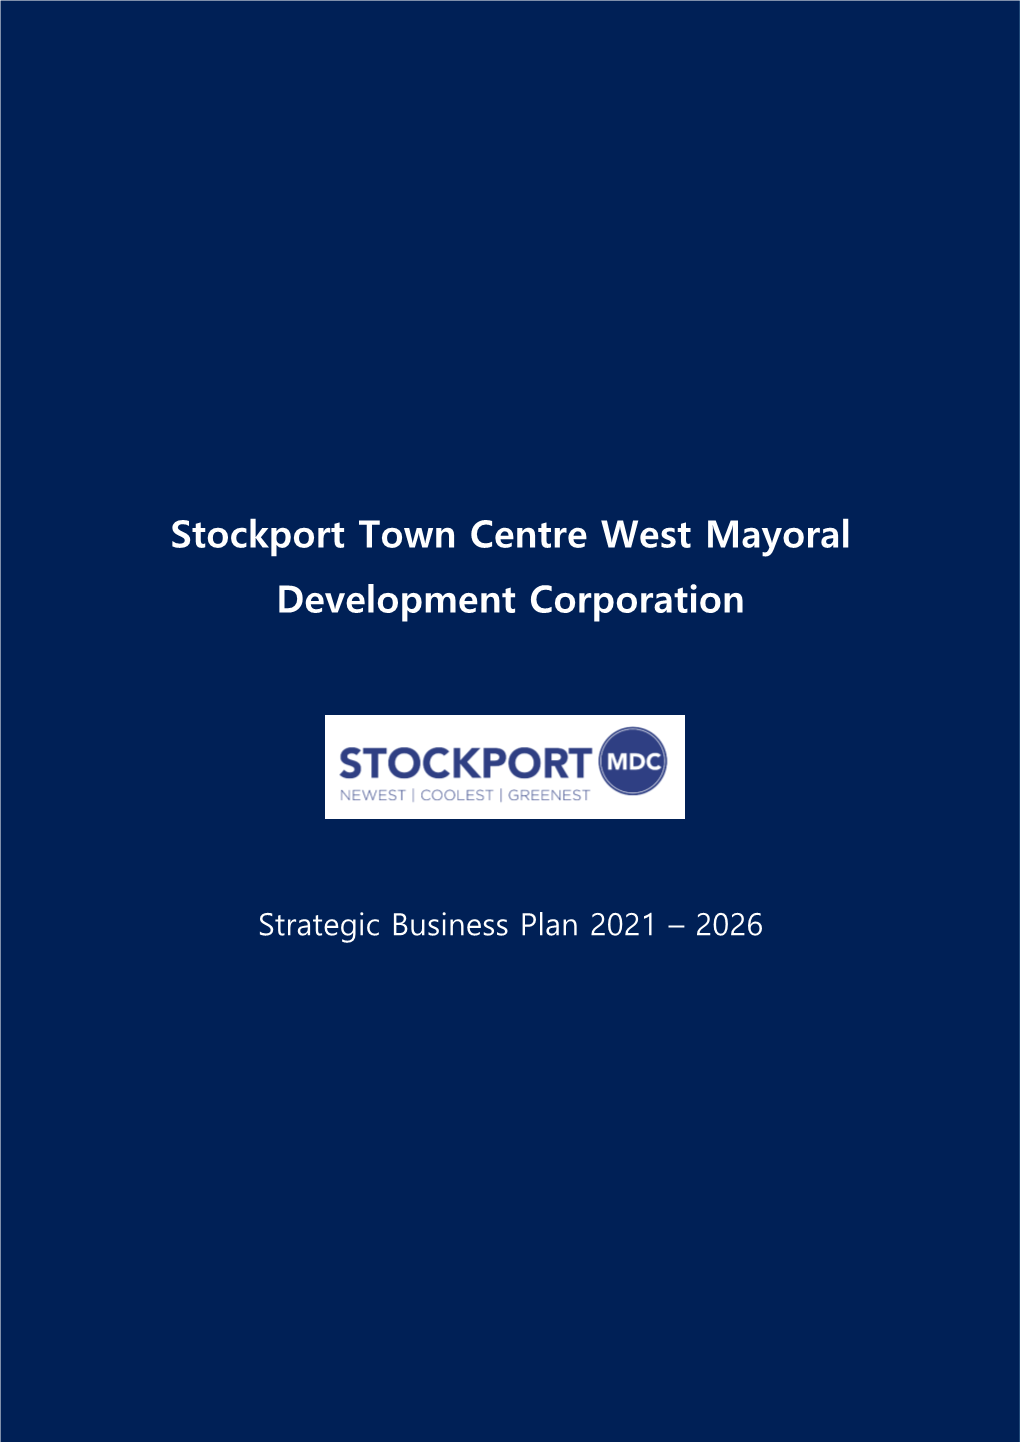 Stockport Town Centre West Mayoral Development Corporation